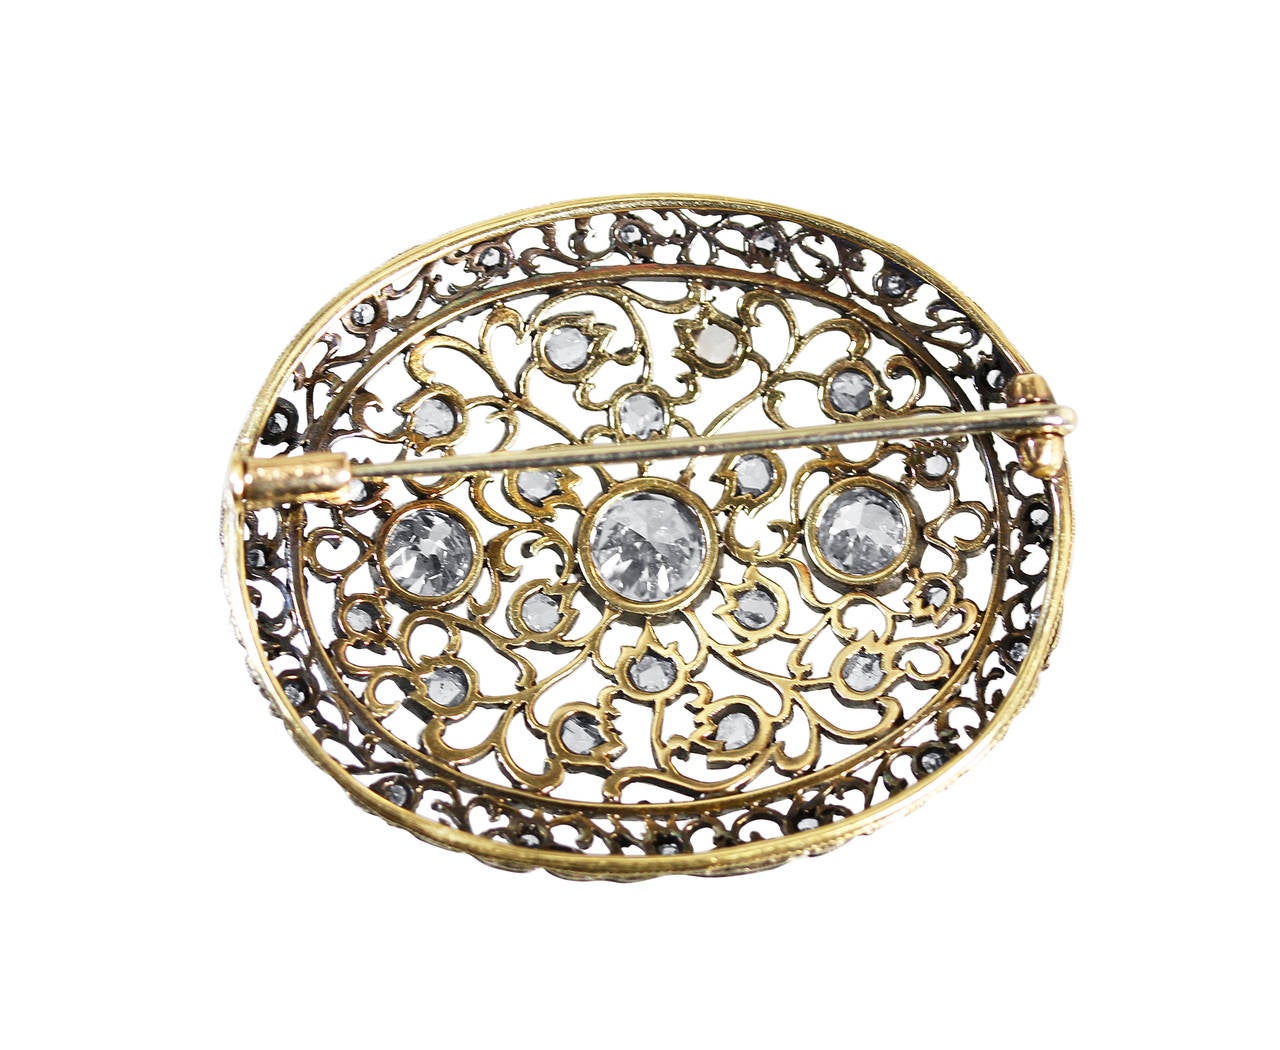 An antique silver, 18 karat yellow gold and diamond brooch by Mario Buccellati, Italy, circa 1930, the oval brooch of openwork floral design set in the center with 3 round and old European-cut diamonds weighing approximately 1.50 carats, further set